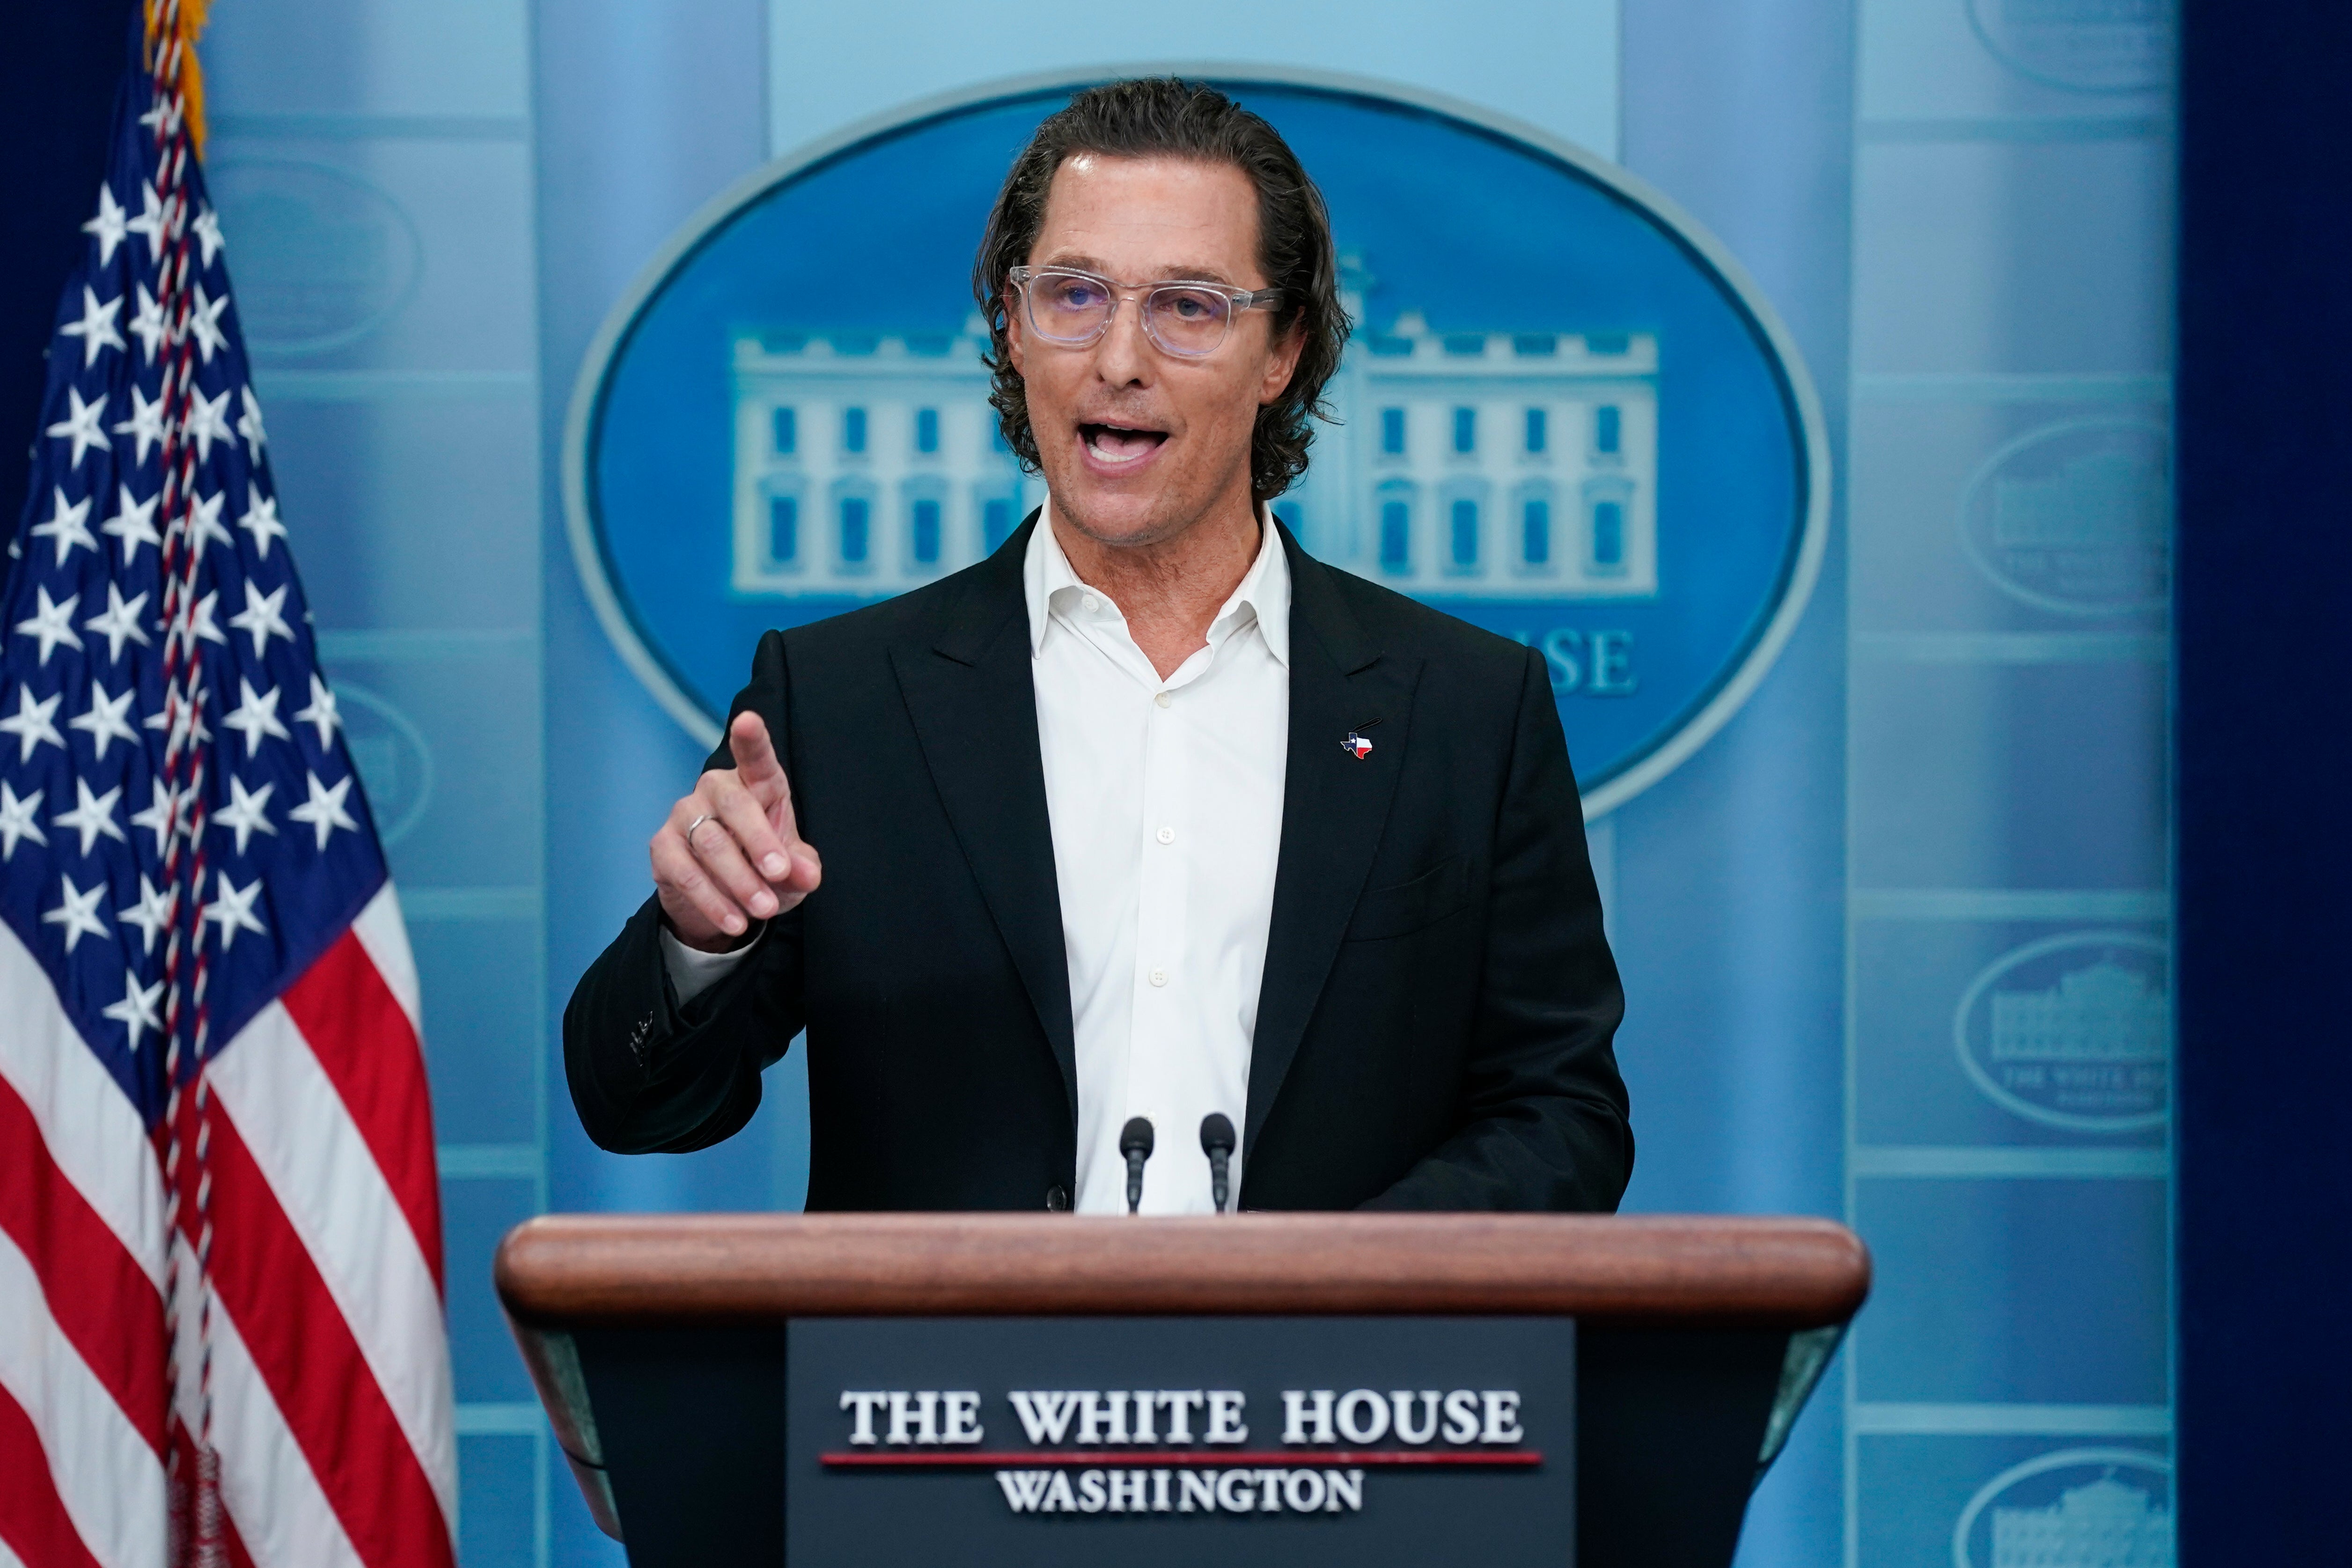 Matthew McConaughey gave an address at the White House following the Uvalde shooting